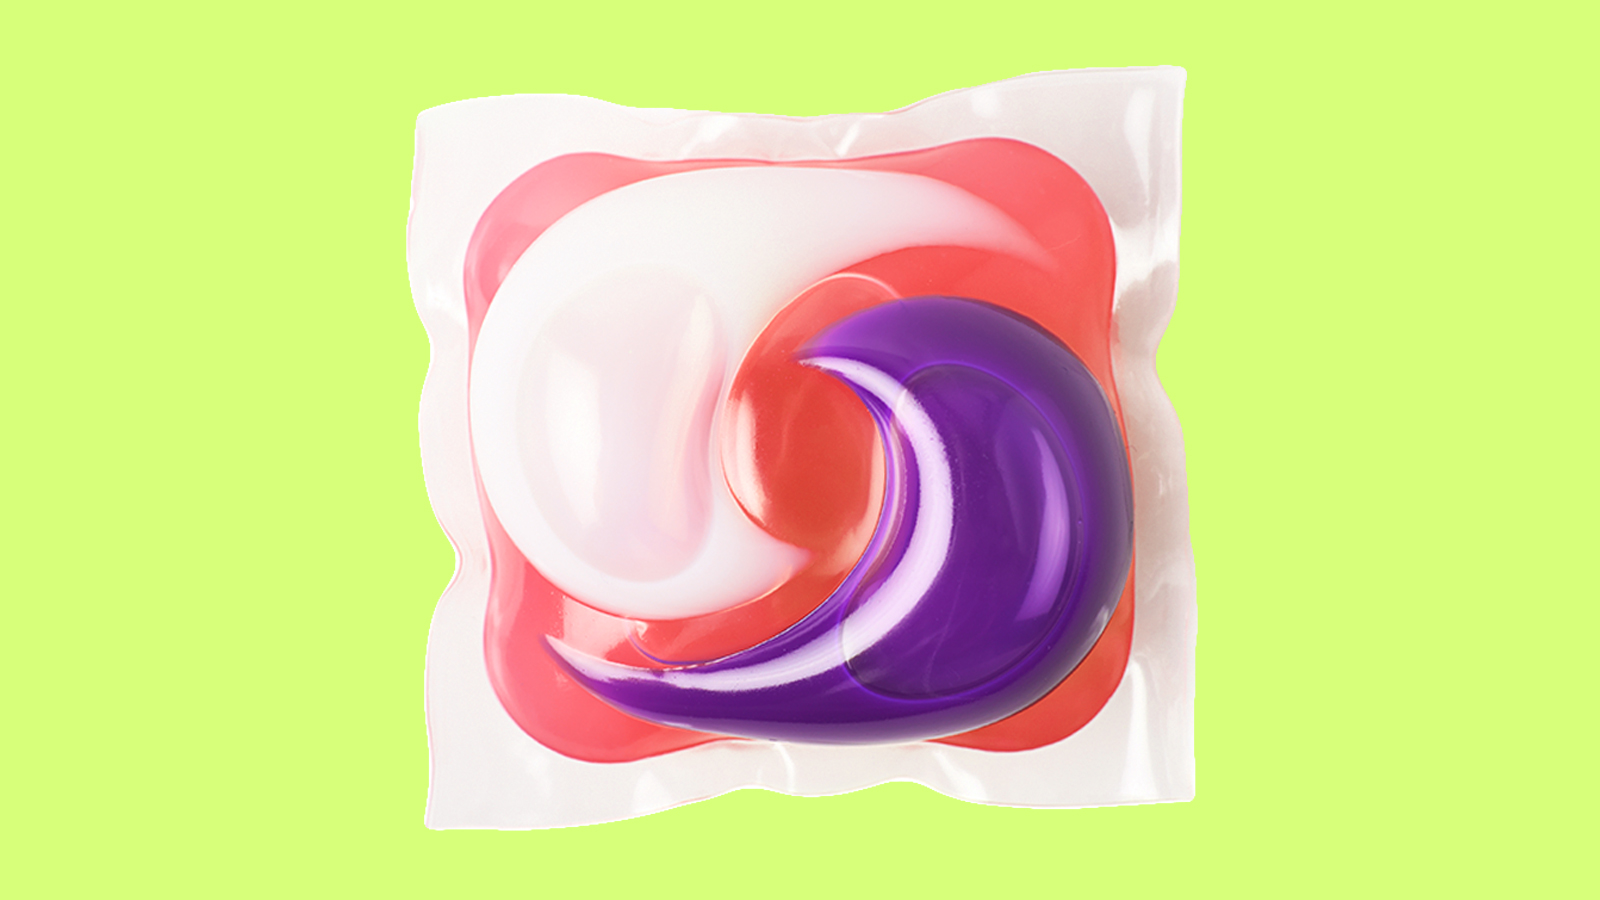 Detergent Pods Are Handy But Can I Use Them With A Clean